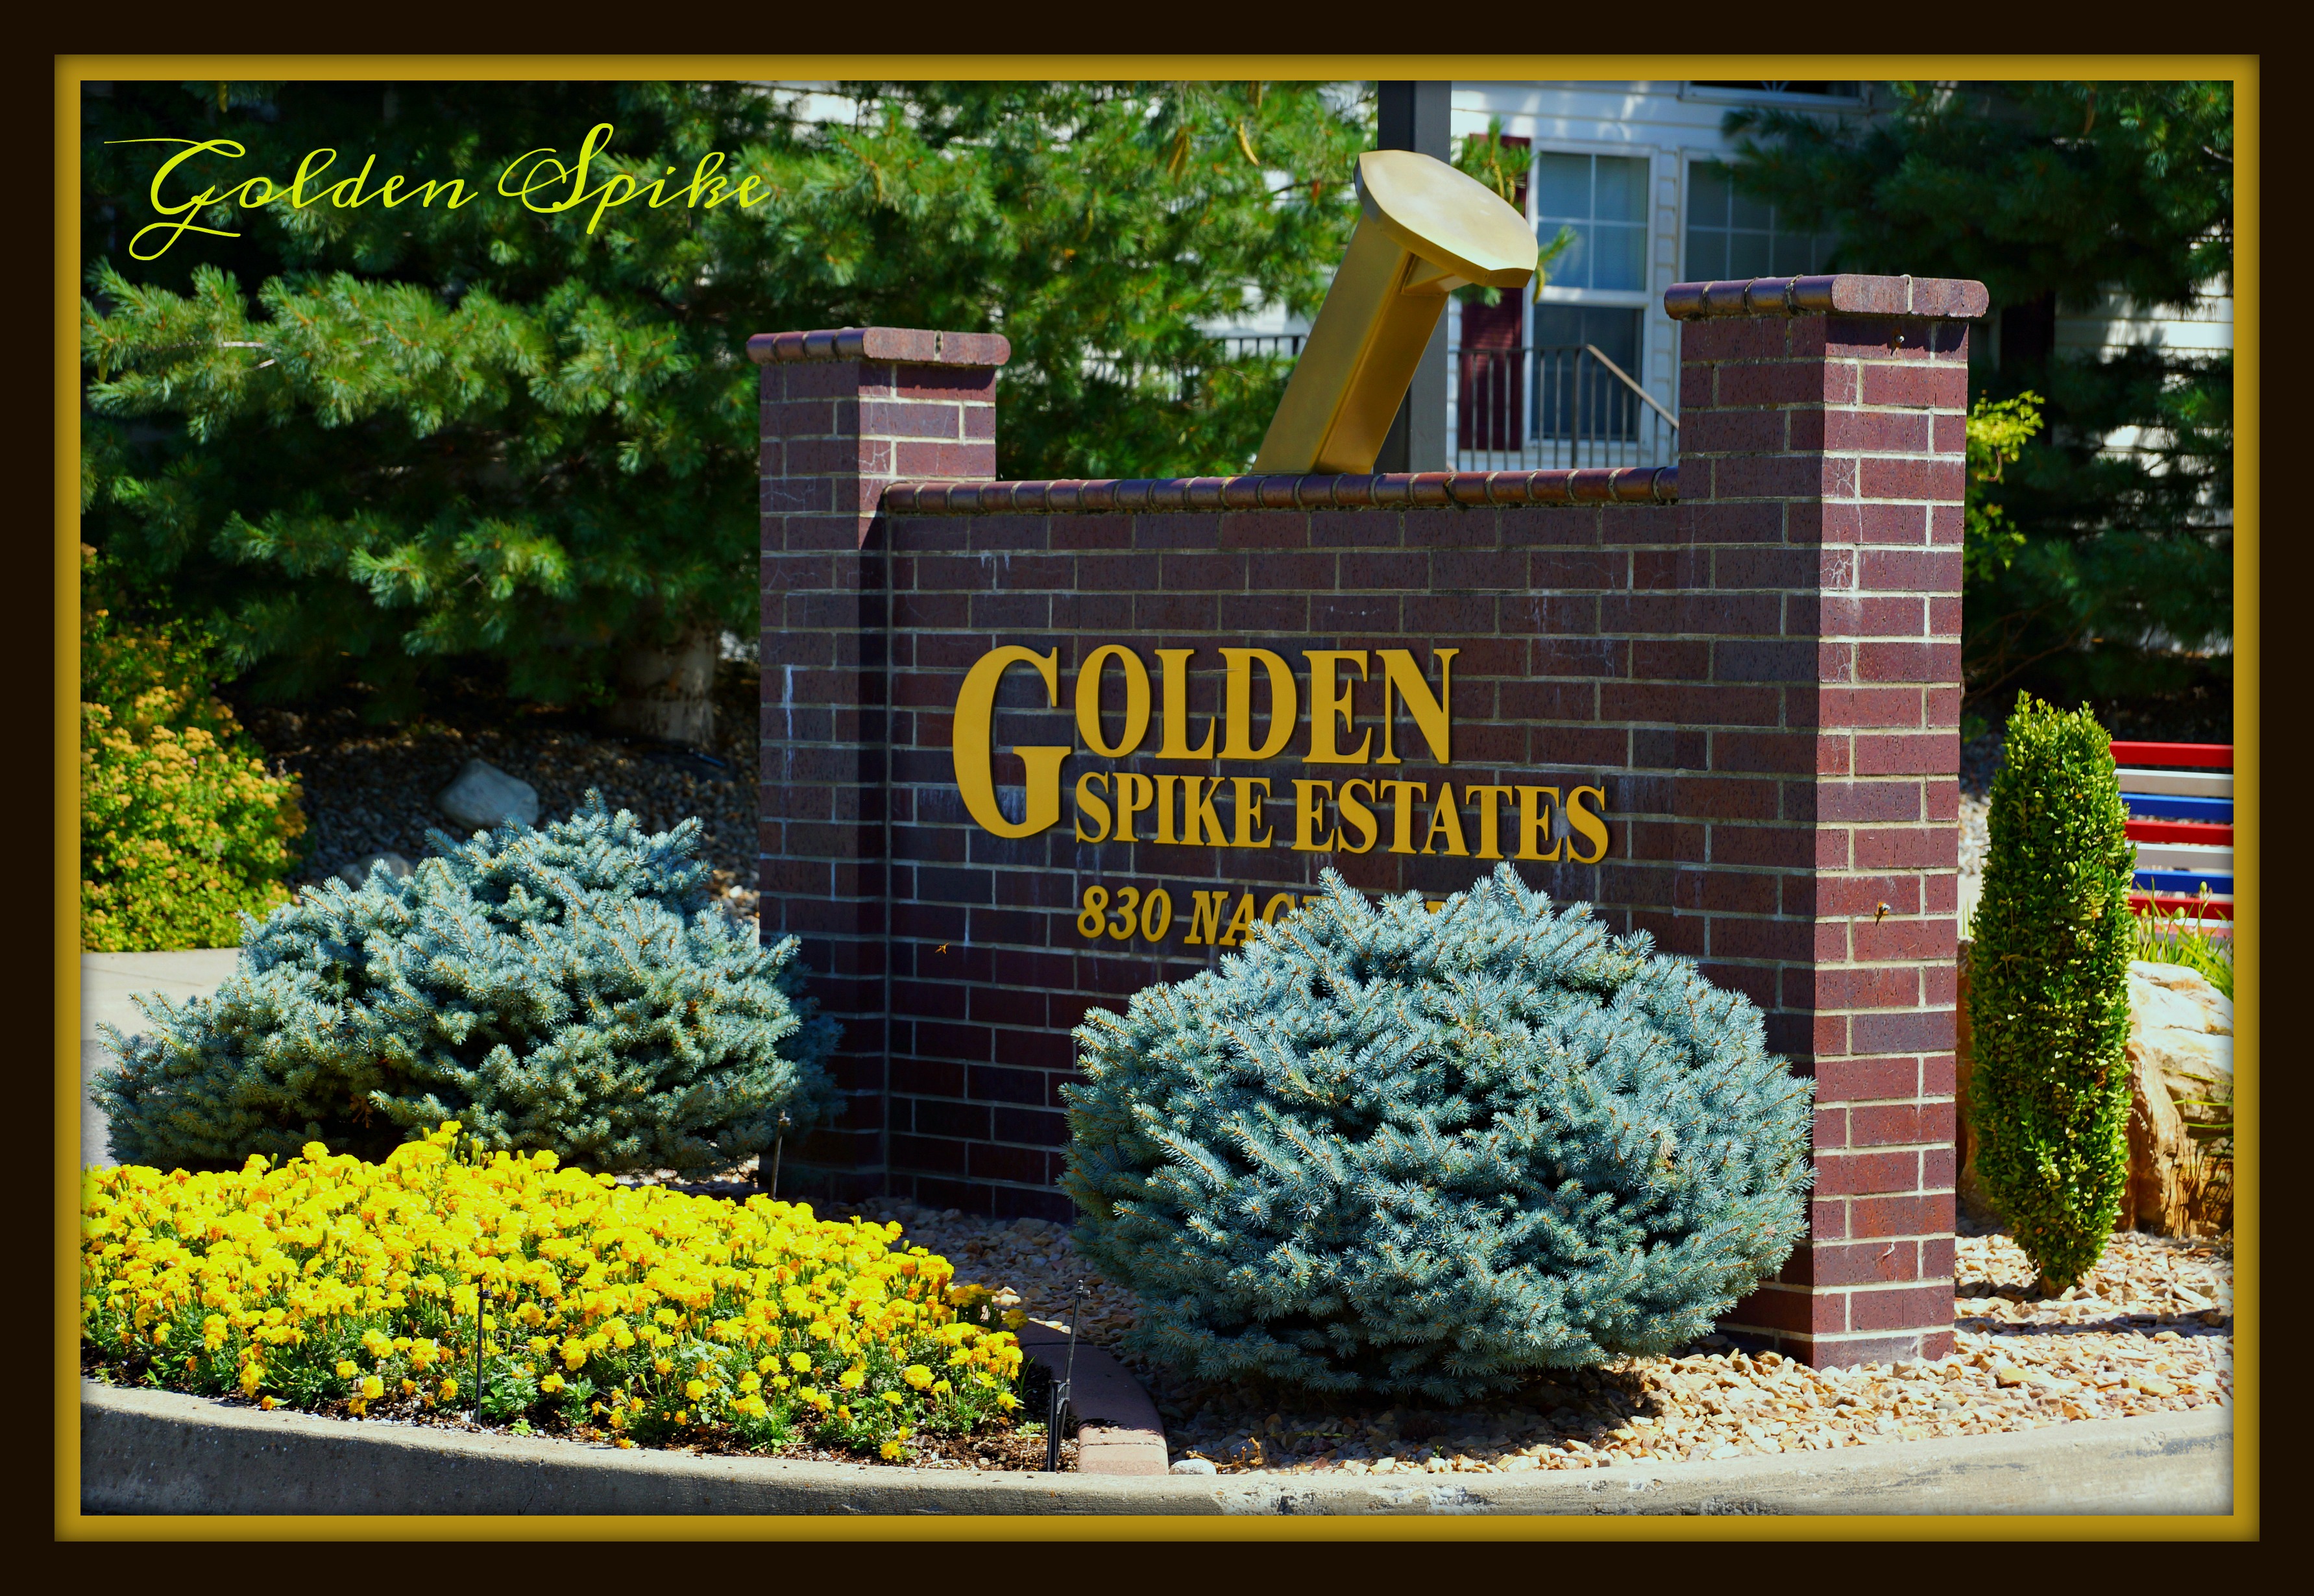 Picture of Golden Spike entrance off Nagel in Rathdrum Idaho